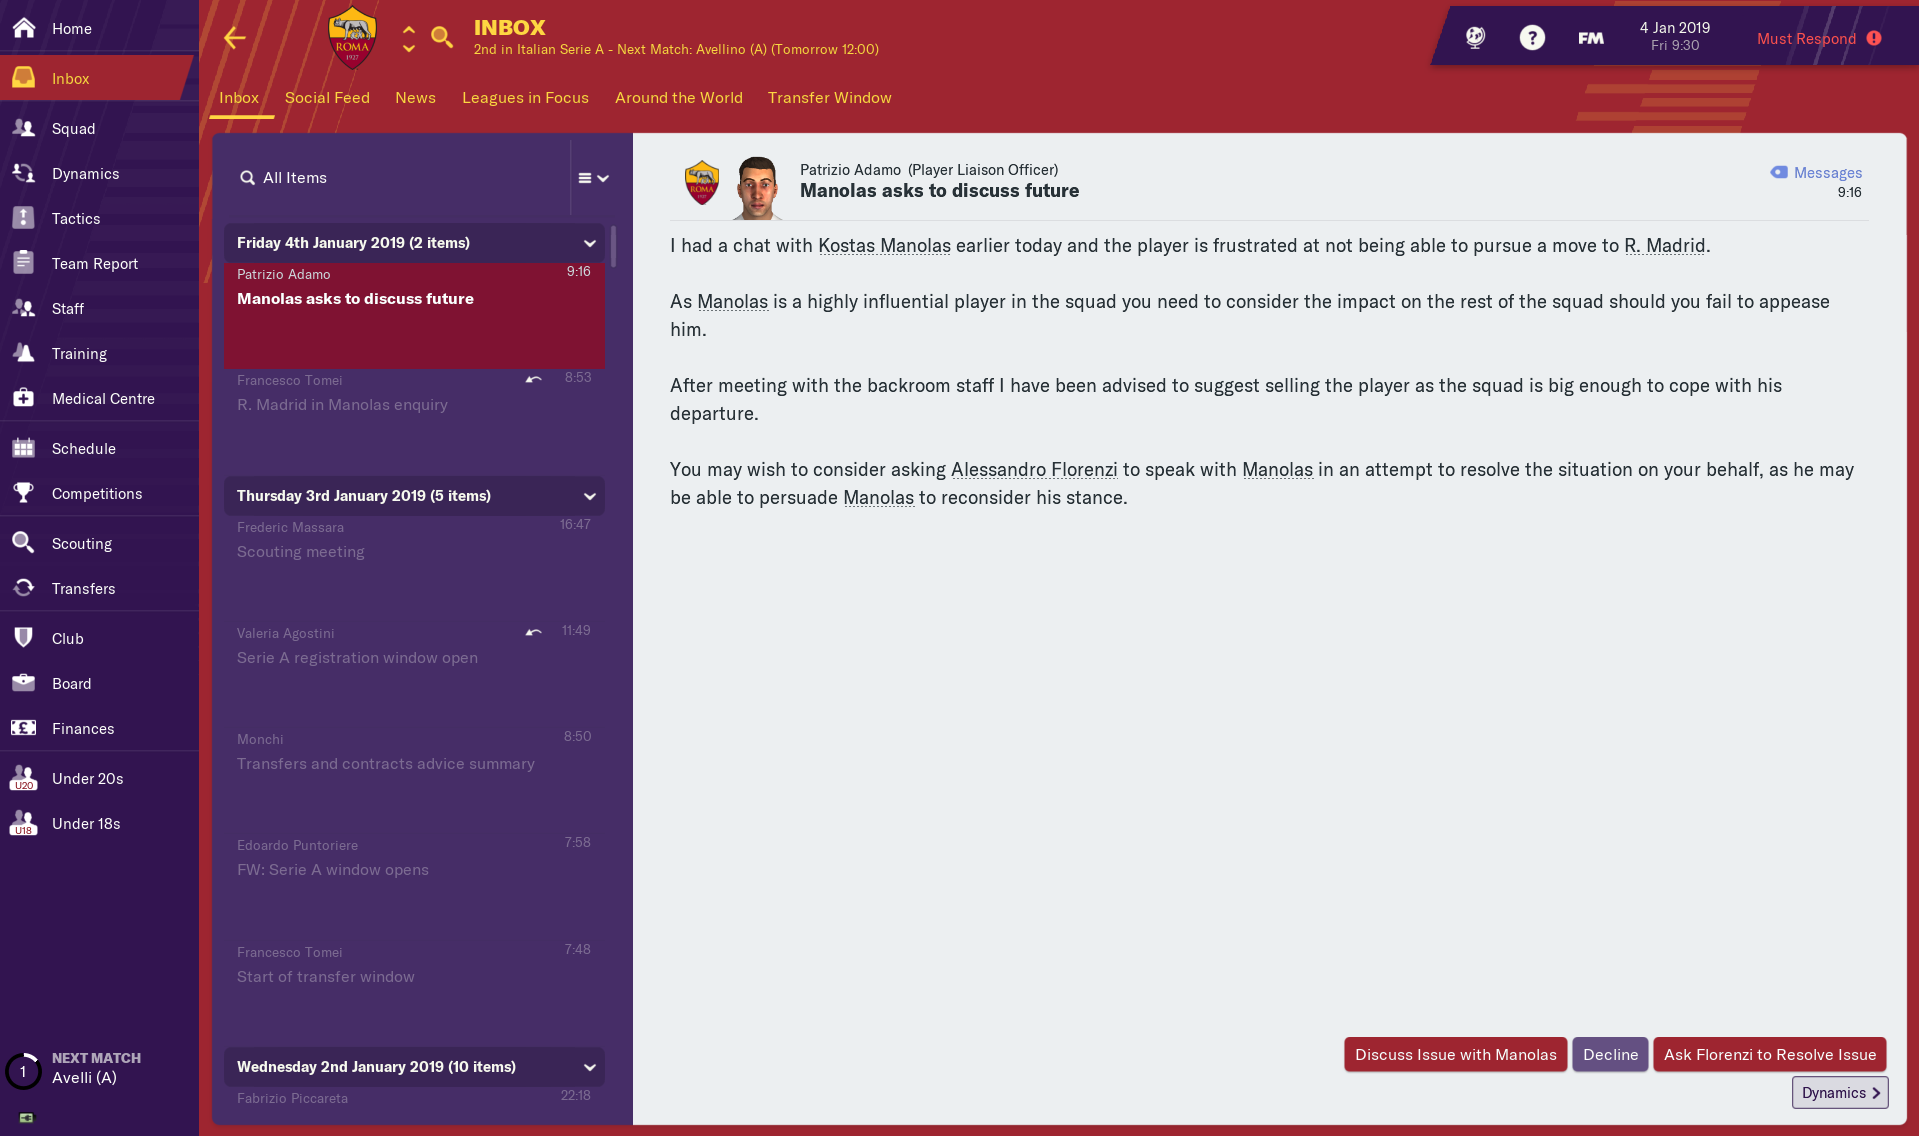 A news item in Football Manager 2019